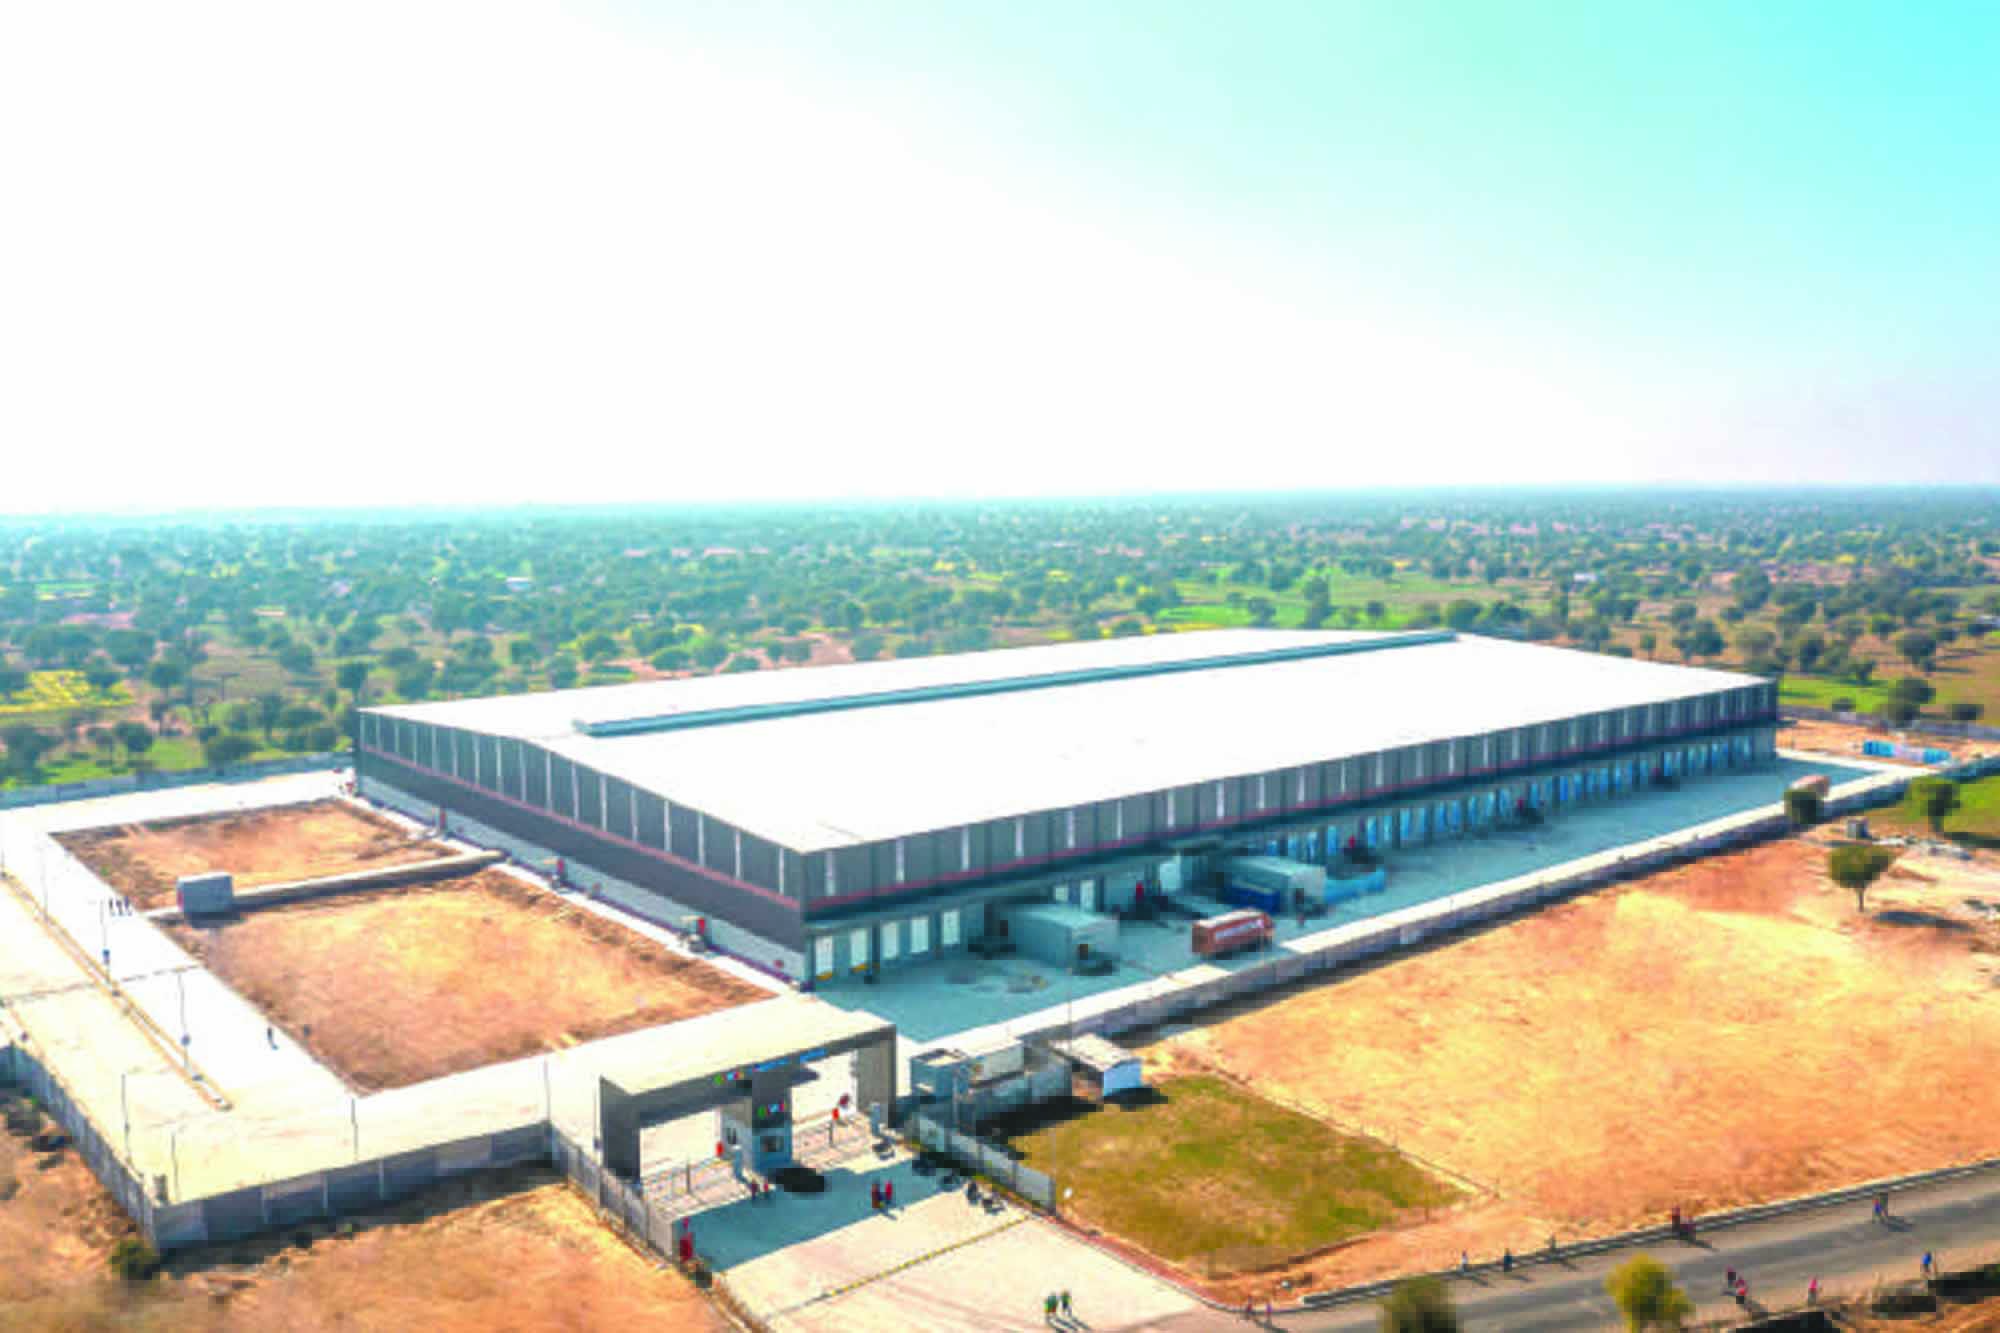 Nahar Industrial Enterprises Ltd. envisioned a warehouse in Jaipur, Rajasthan, that would be tall and change industry standards. They joined together with Everest Industries and sought to establish a reliable and innovative warehouse.